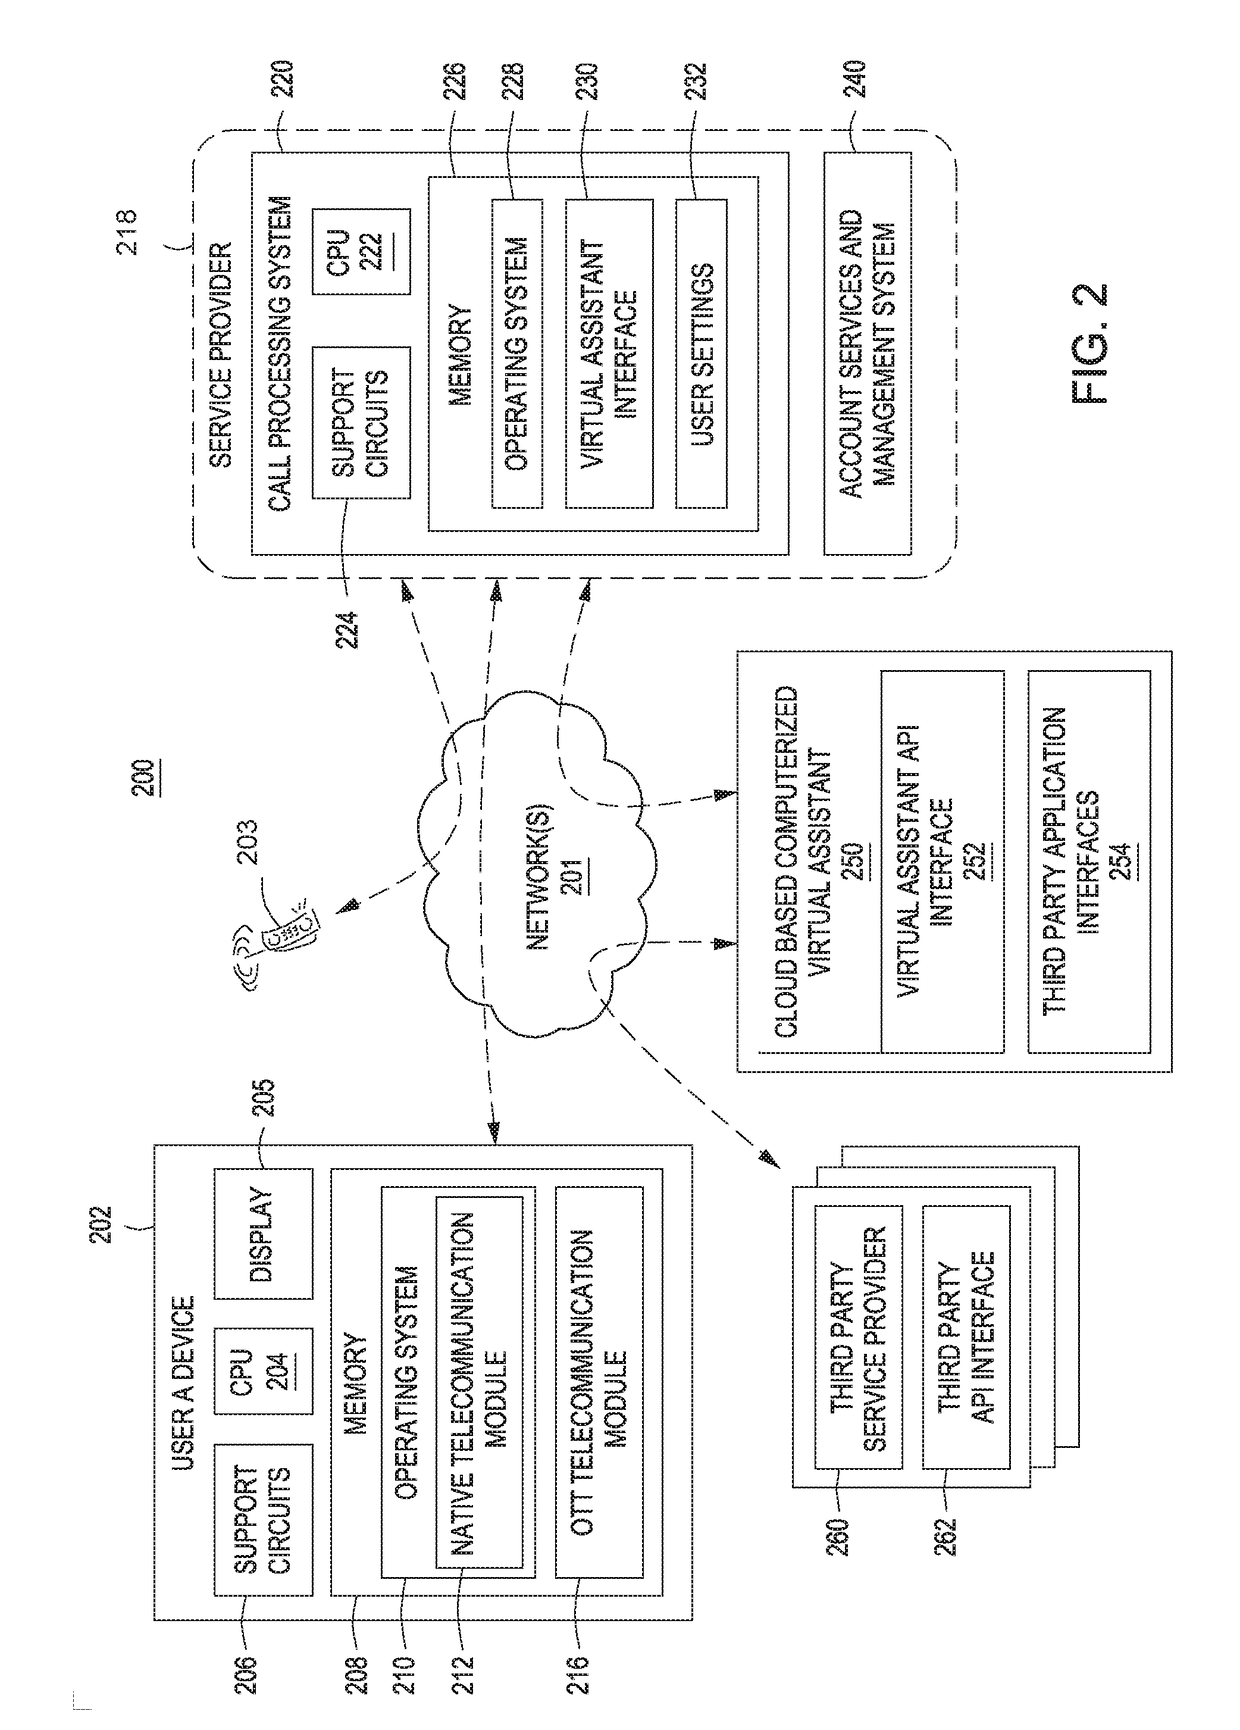 Systems and methods for providing integrated computerized personal assistant services in telephony communications